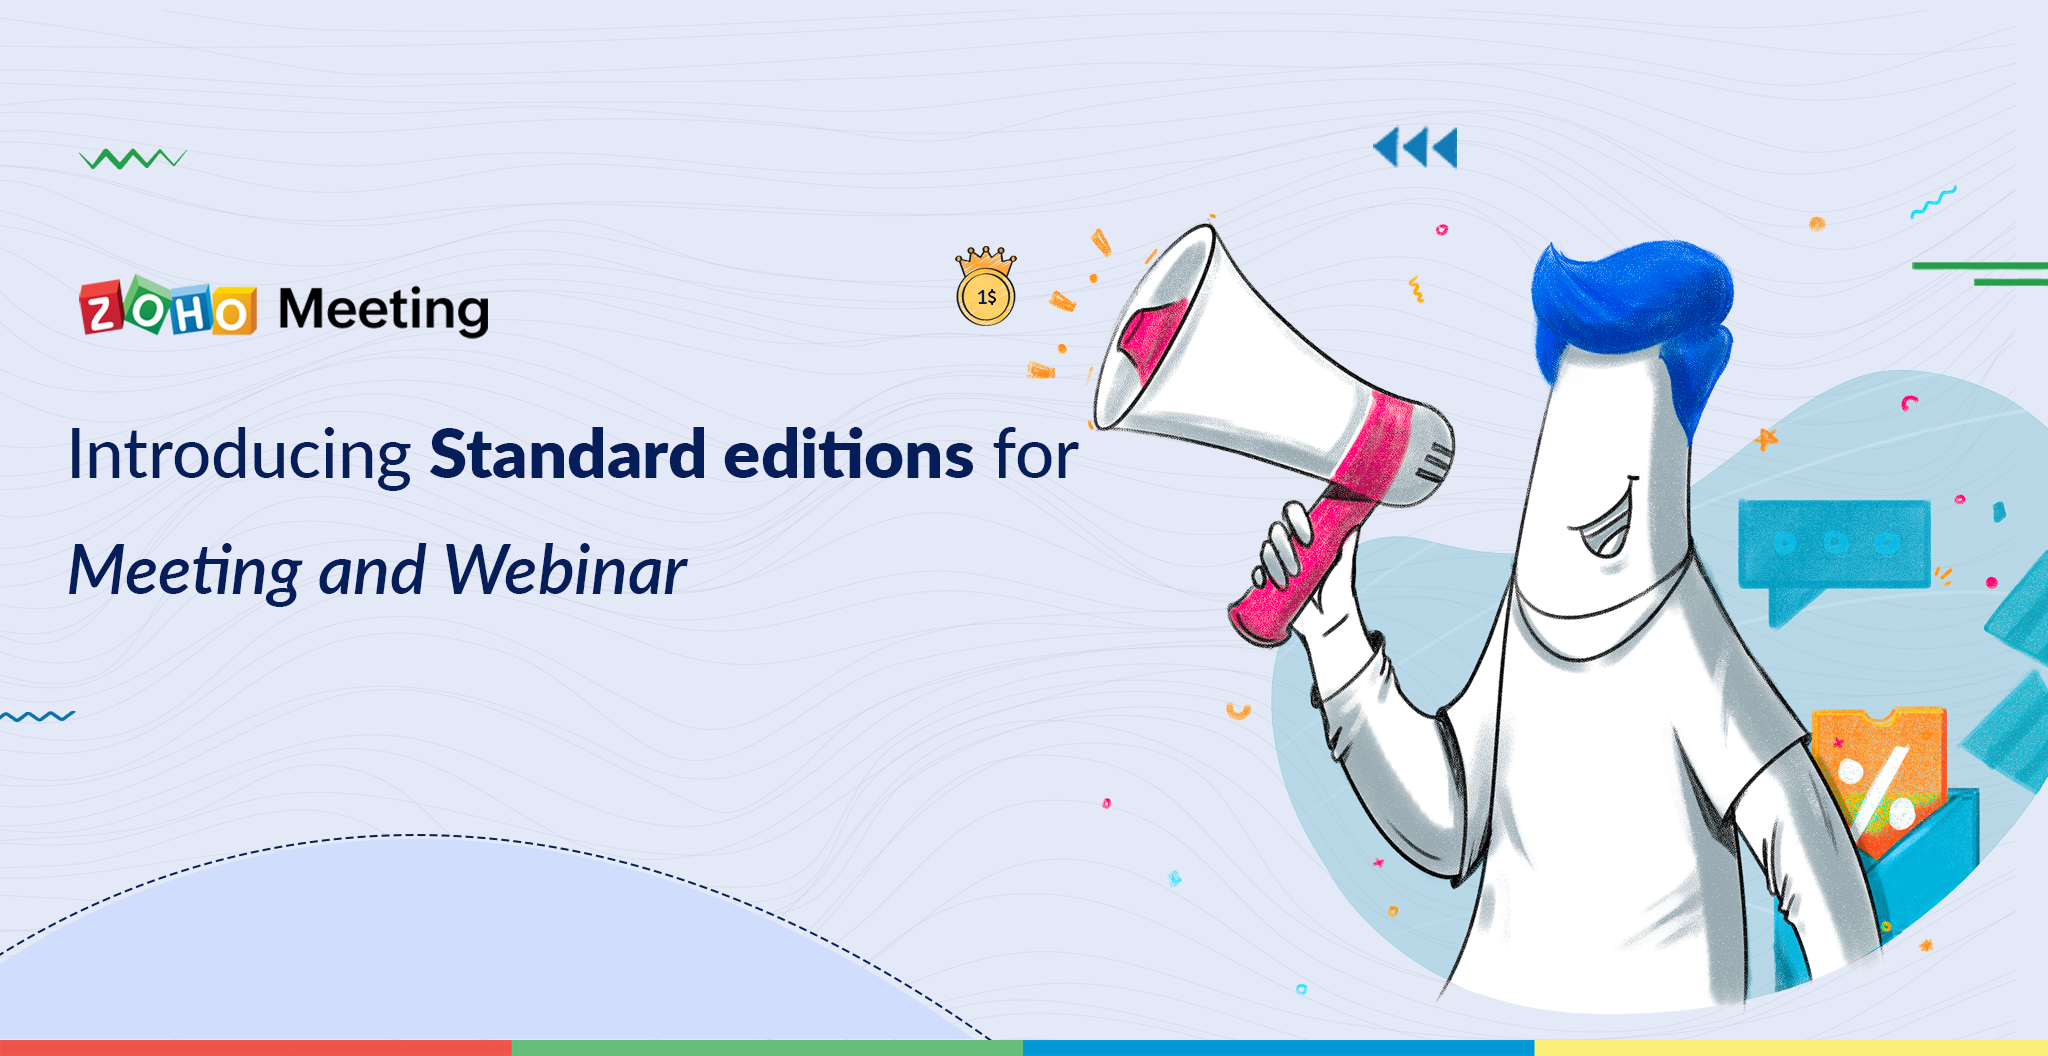 Introducing Zoho Meeting’s Standard edition—starting at $1